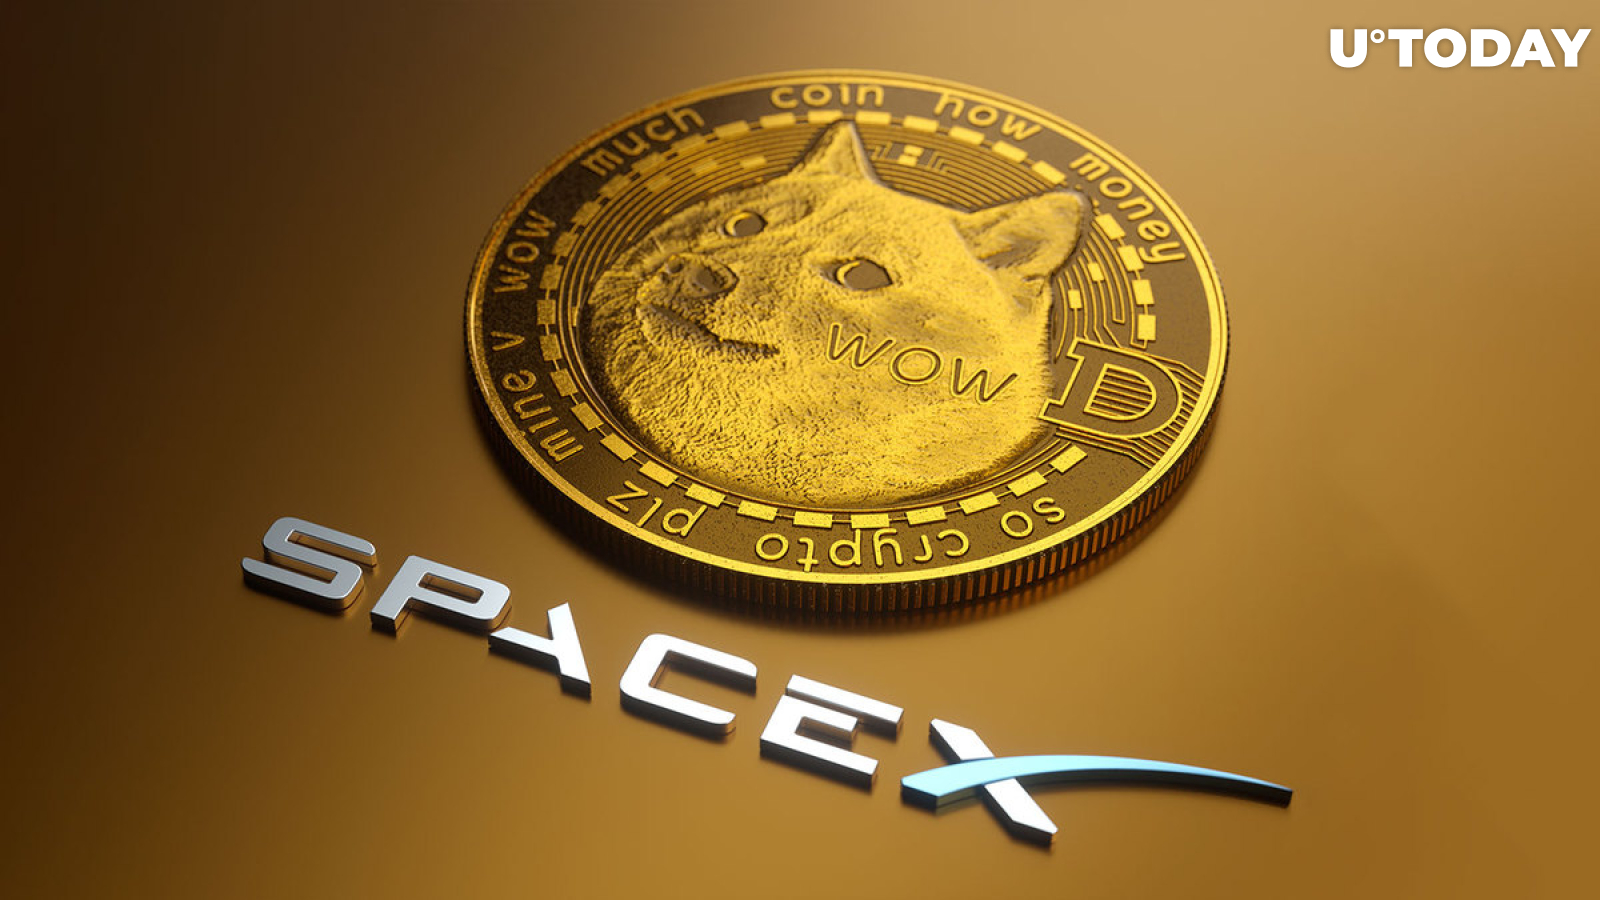 Dogecoin (DOGE) Price Rebounds as SpaceX Confirms: 'Everything Is Good'